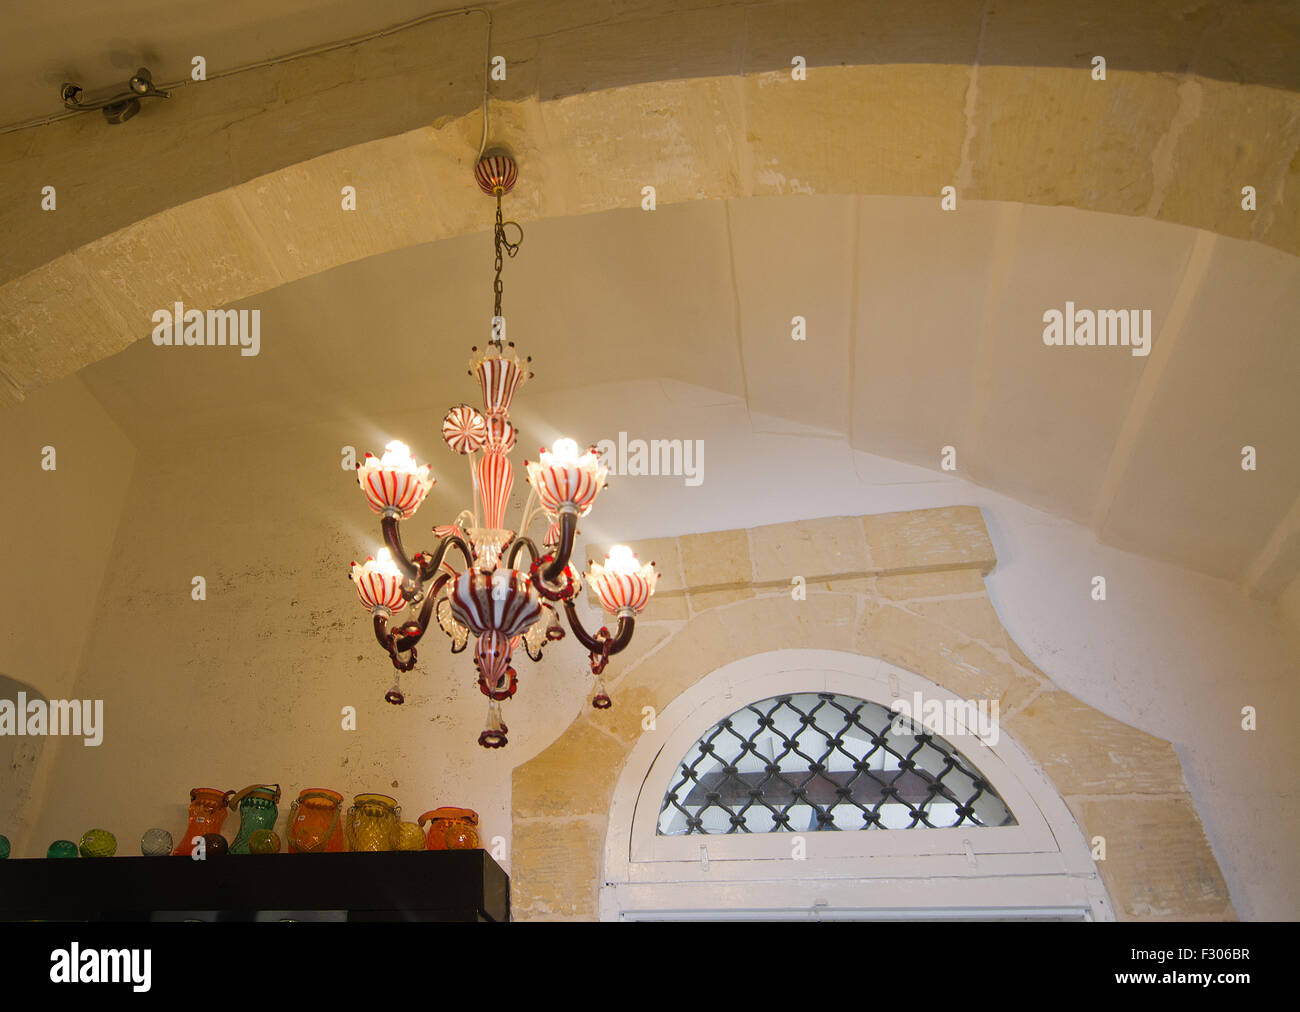 Beautiful red and white, handblown glass chandelier made by artisans in Malta on display in Mdina glass store. Stock Photo